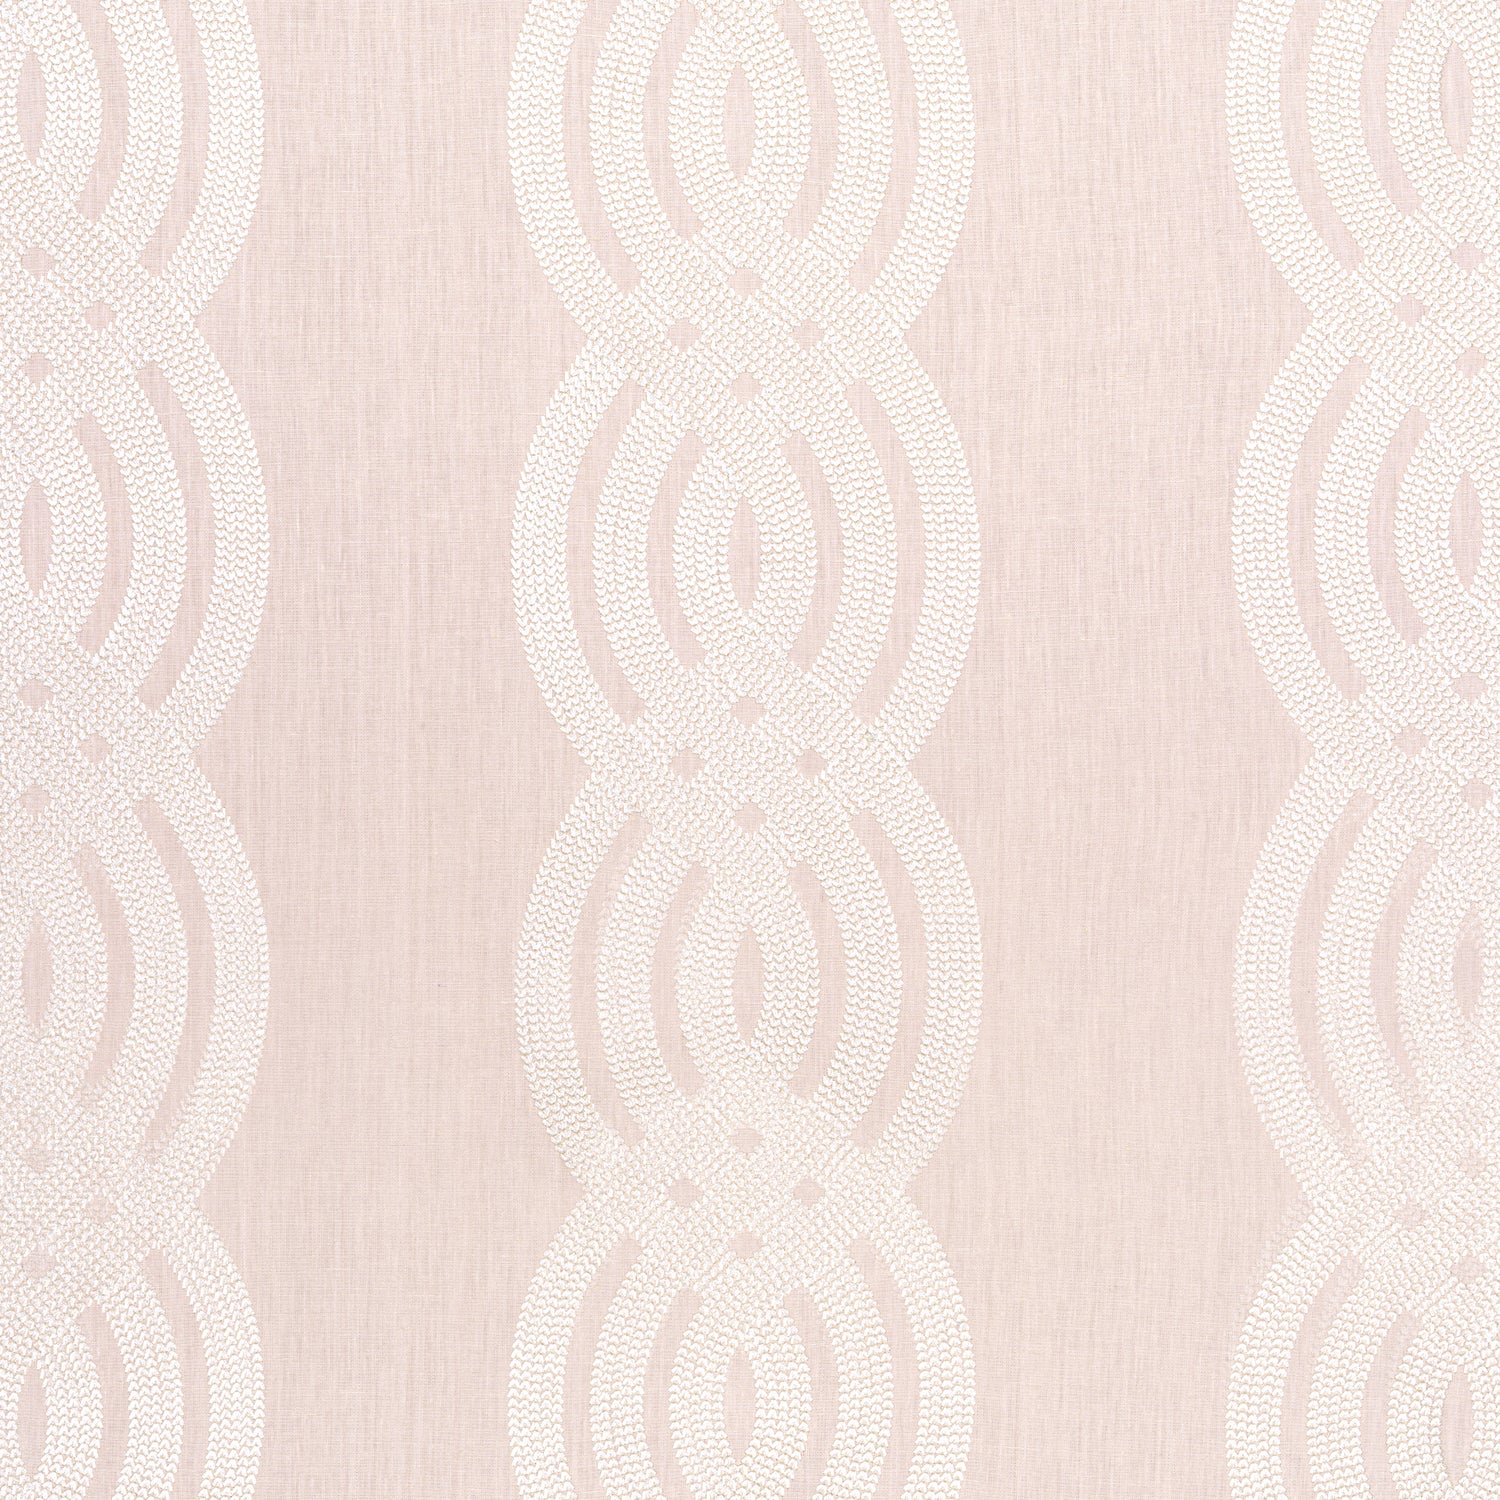 Braid Embroidery fabric in blush color - pattern number W710801 - by Thibaut in the Heritage collection